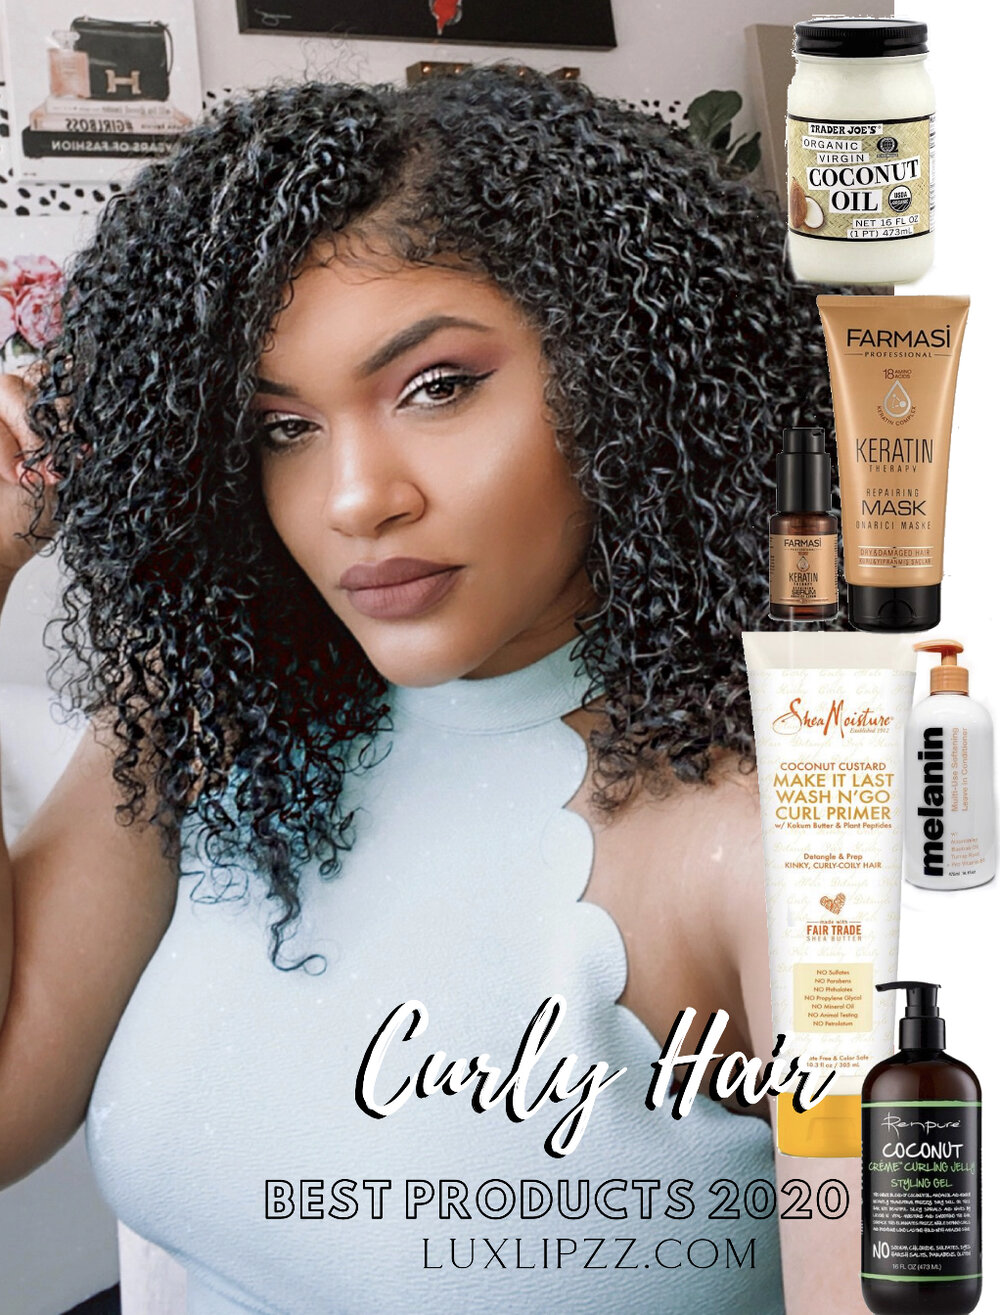 Best Curly Hair Products 2020 — Best Curly Hair Products 2020